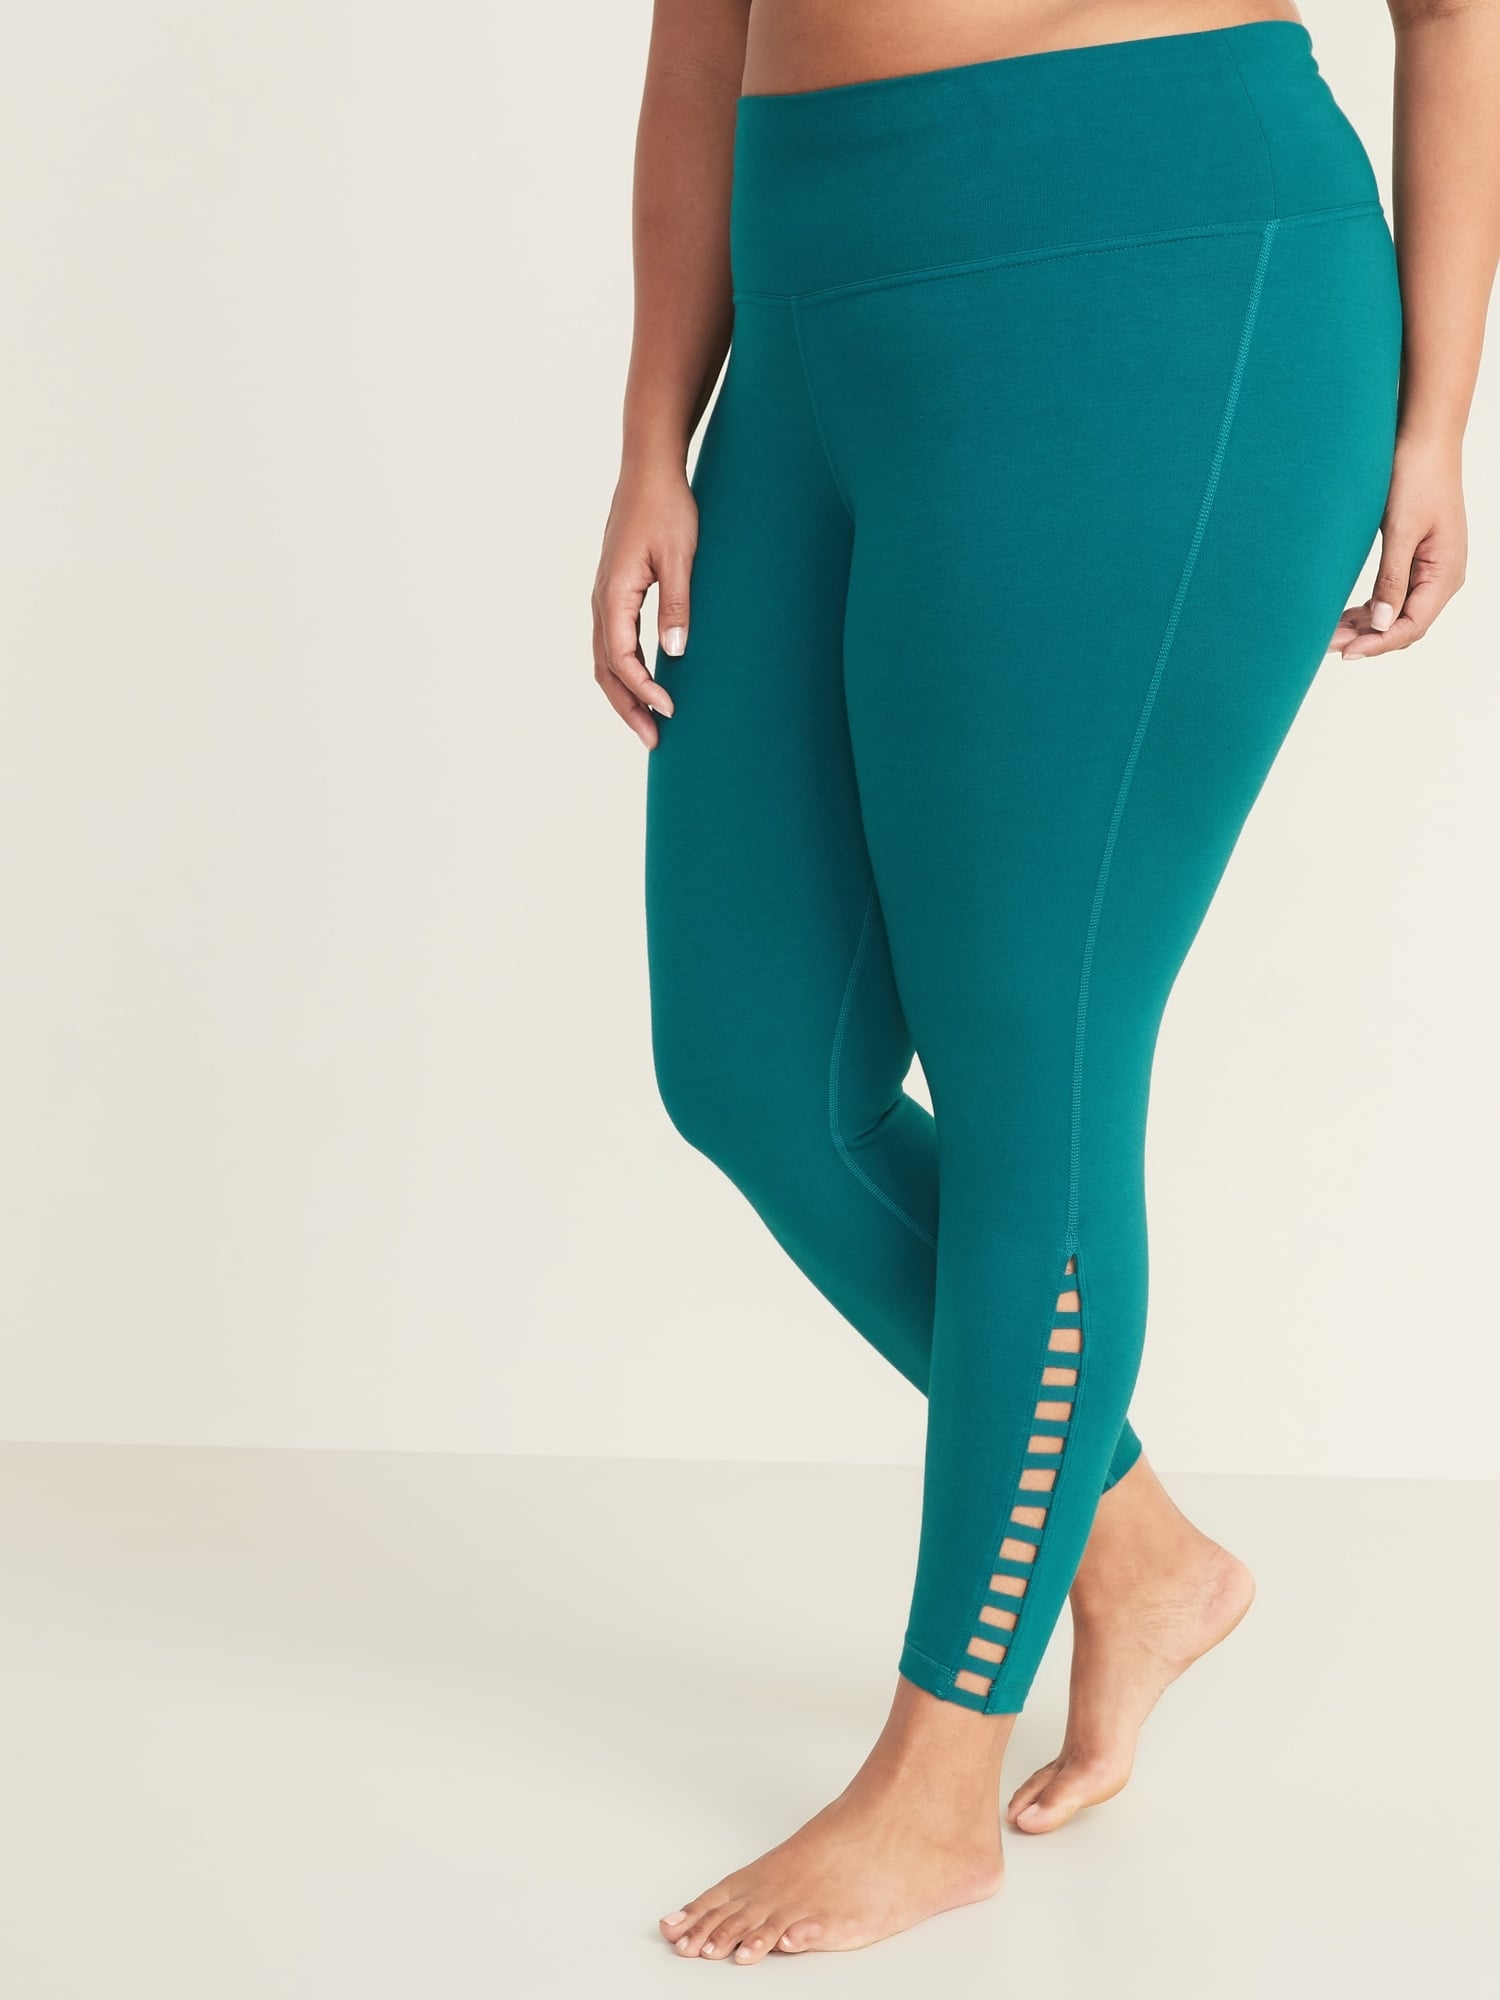 old navy plus size athletic wear